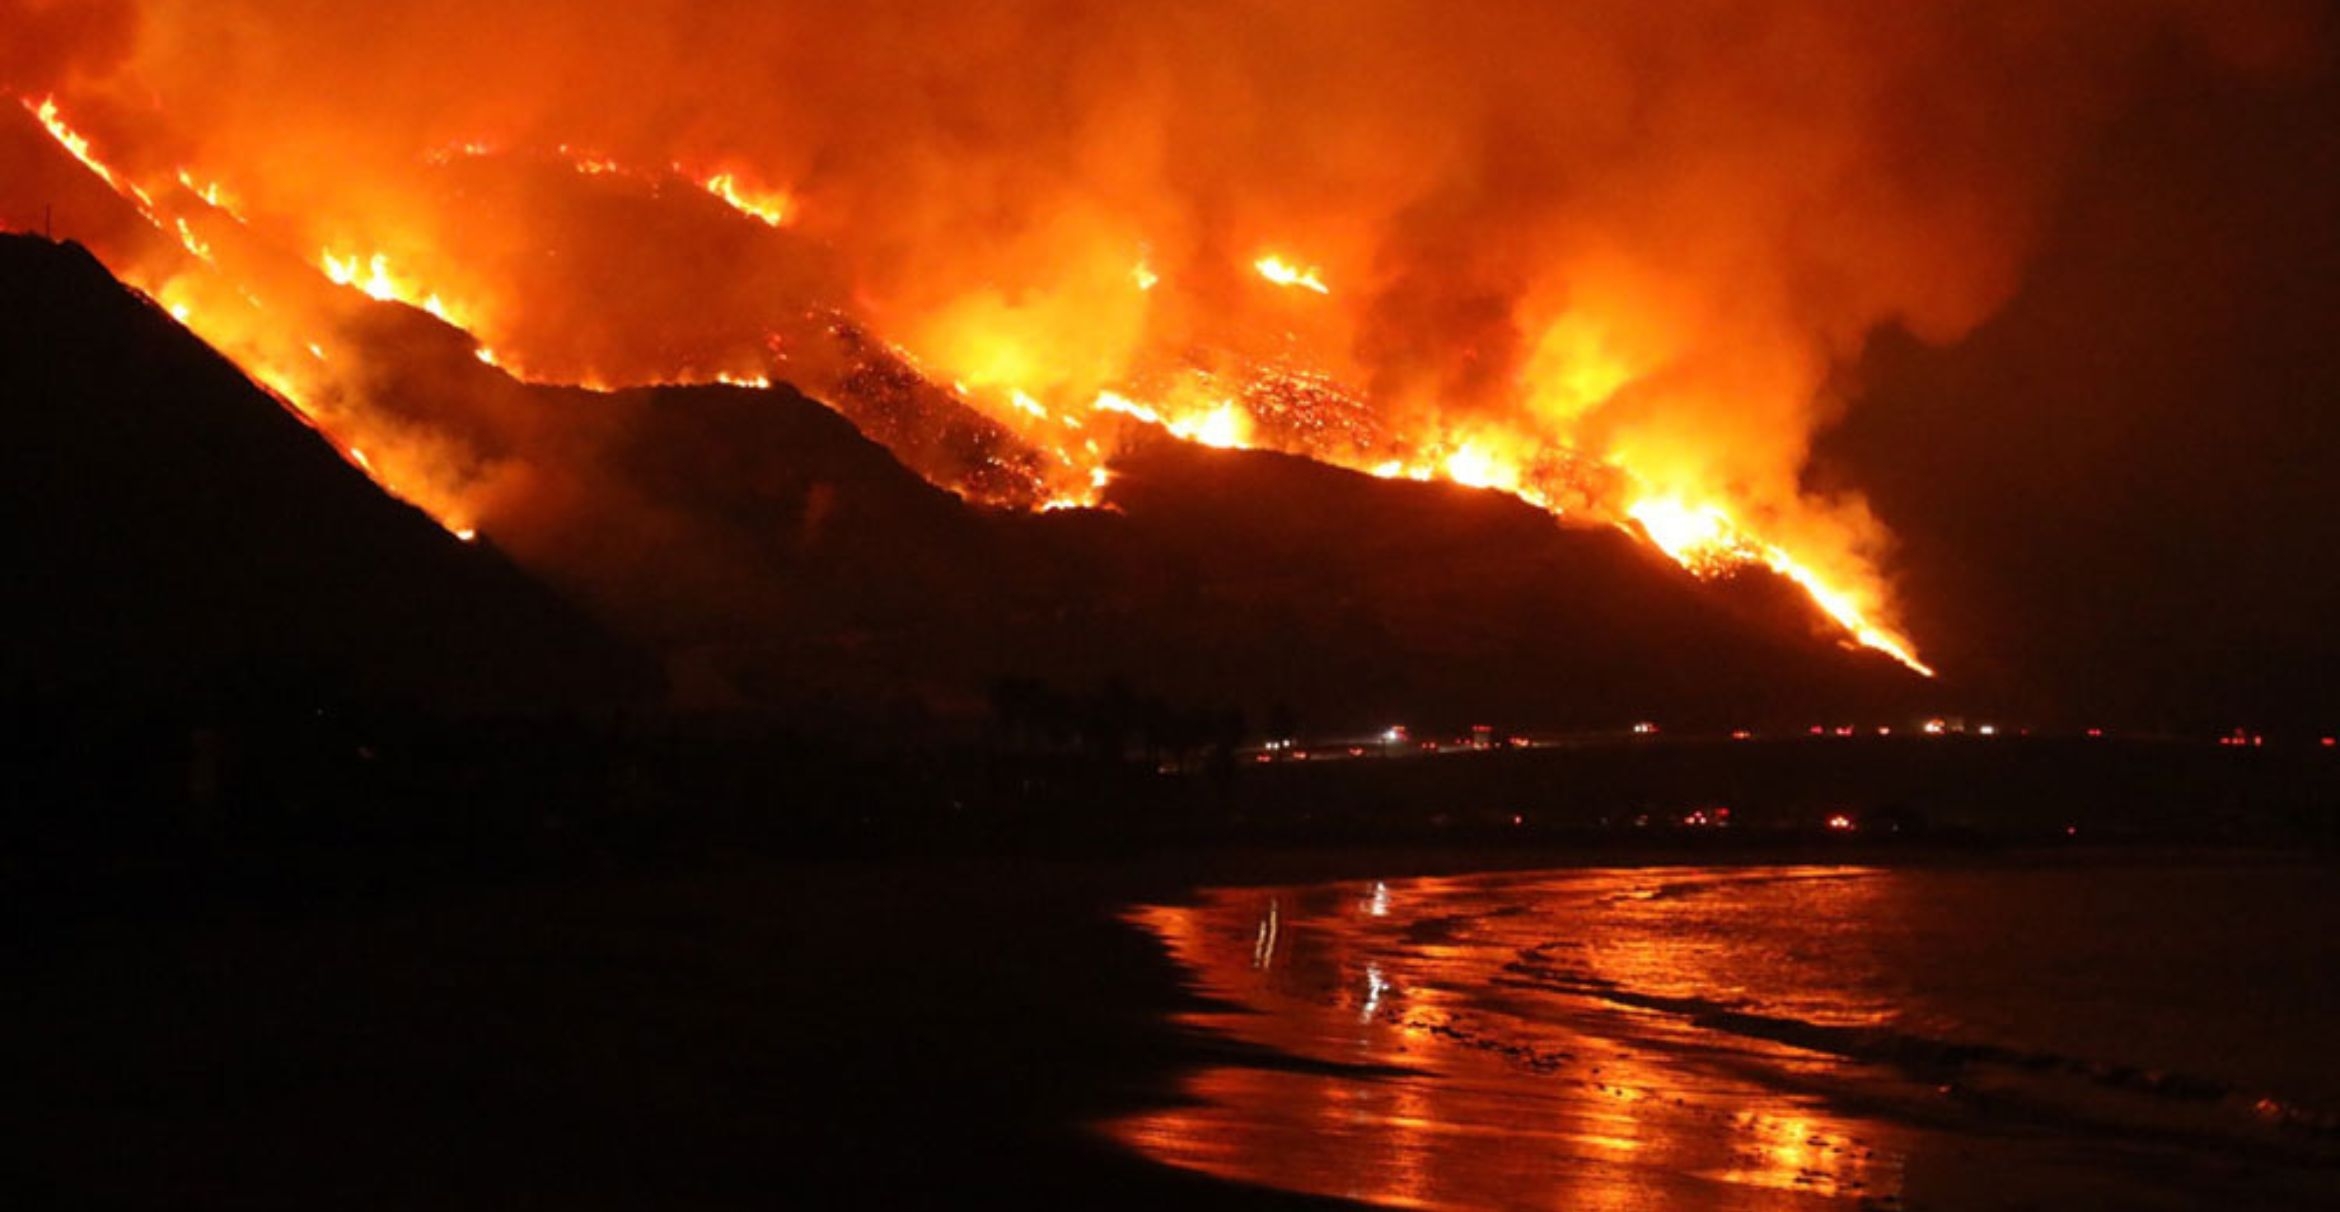 Flames from the Thomas Fire reflect in the waves at night.